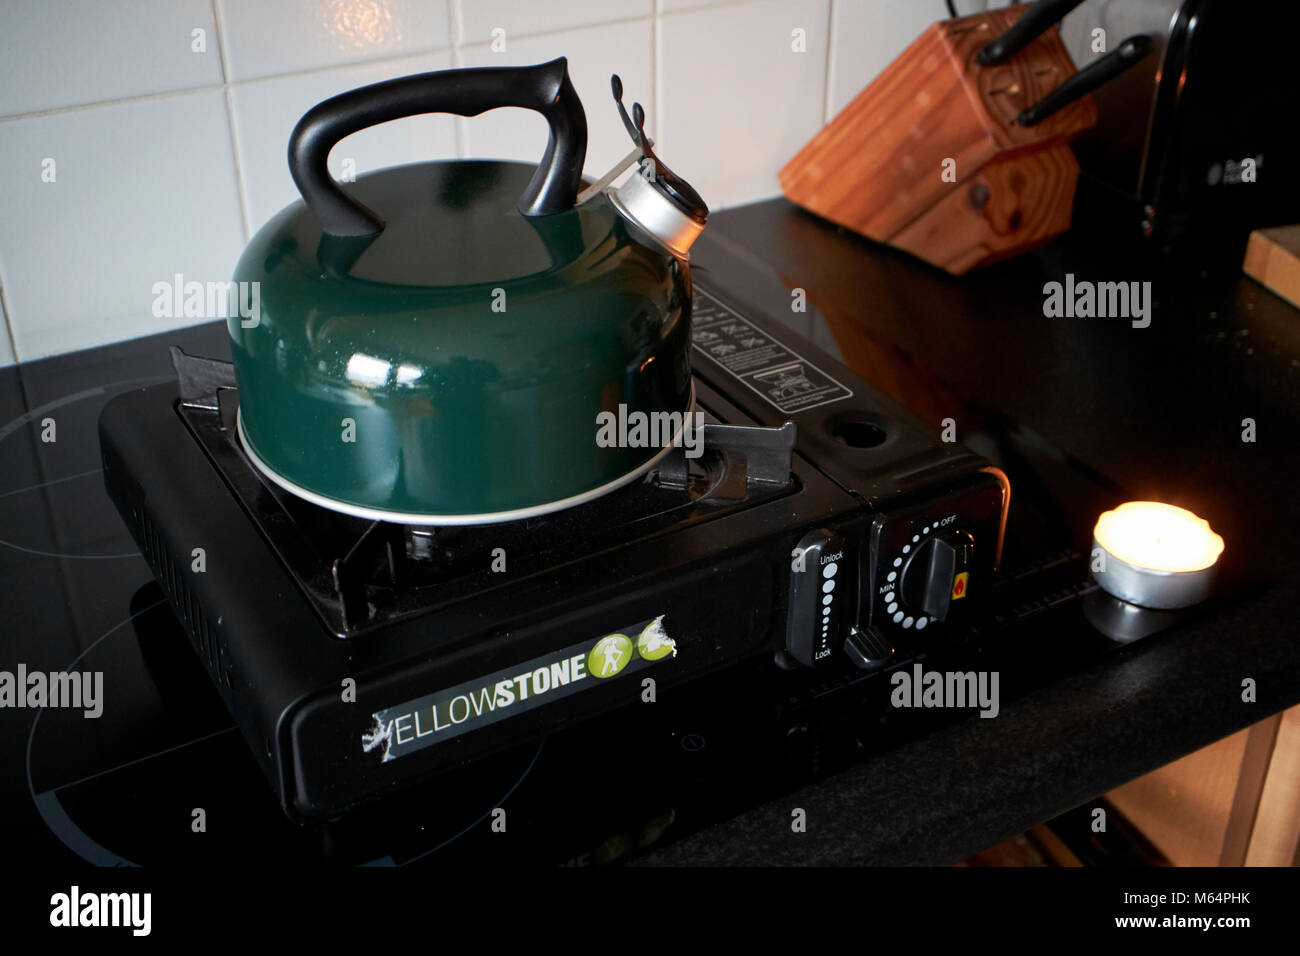 Emergency Power Off High Resolution Stock Photography And Images Alamy